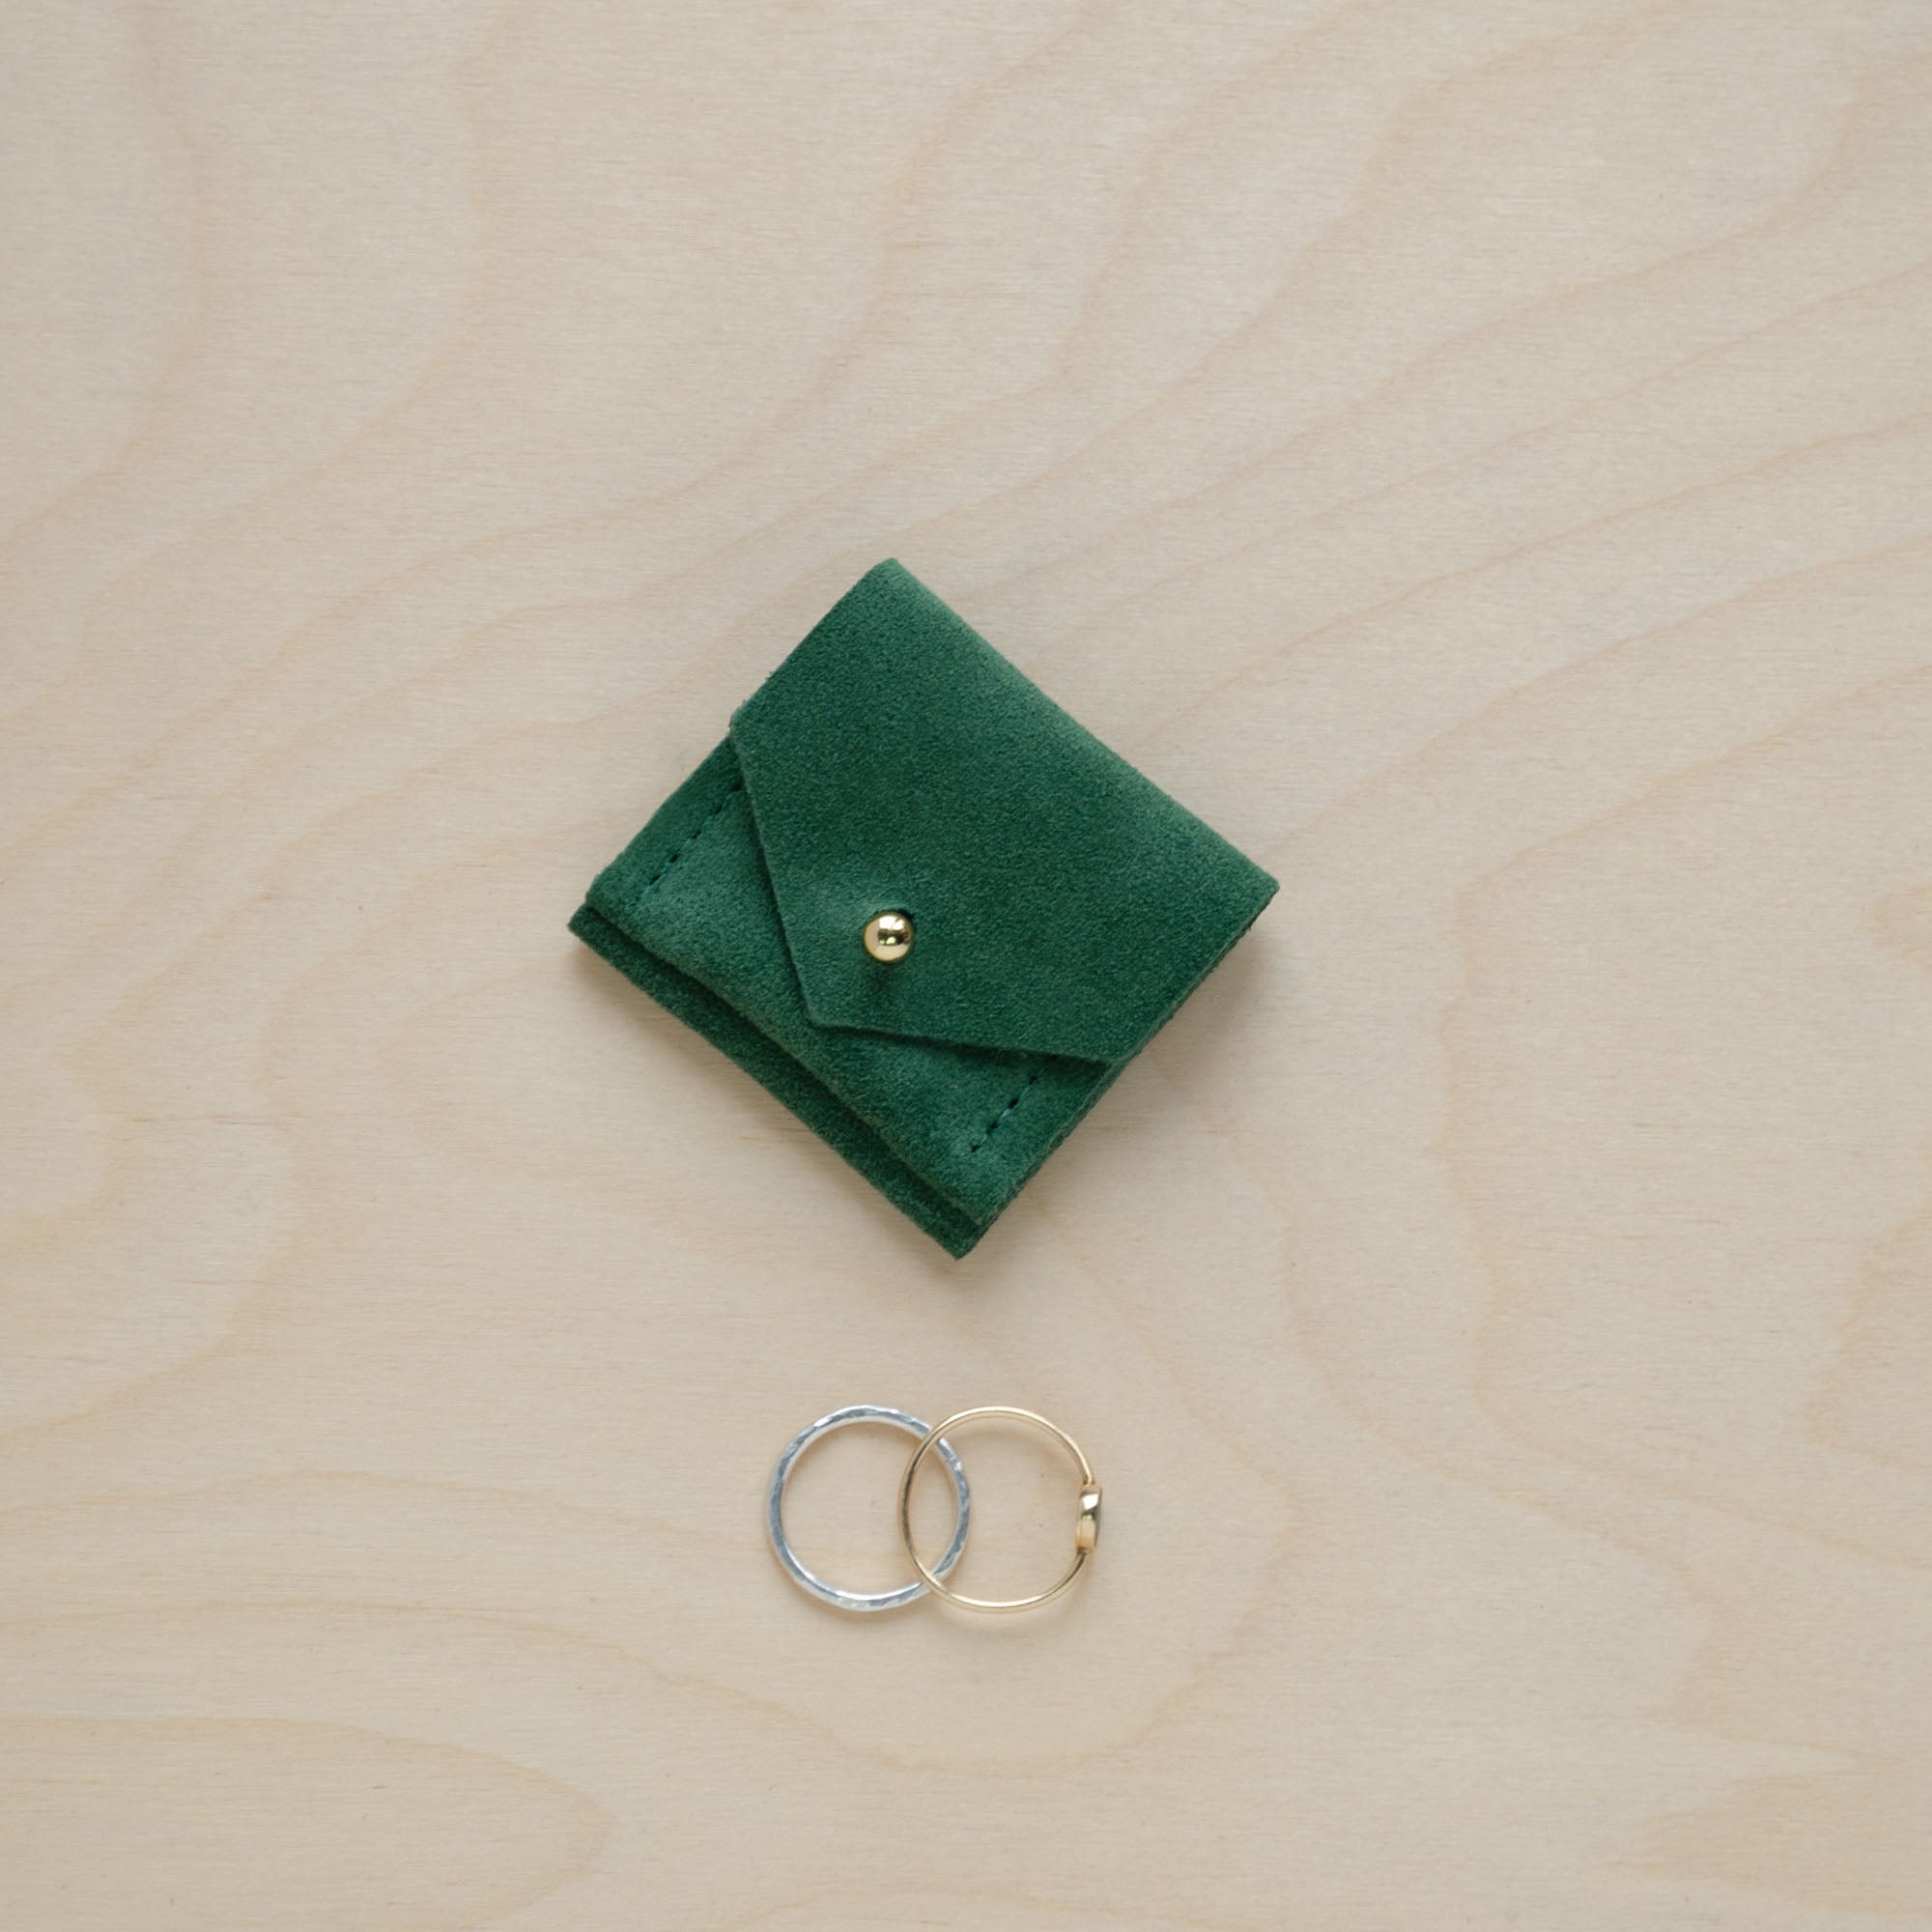 Moss Green Wedding Ring Pouch in suede.